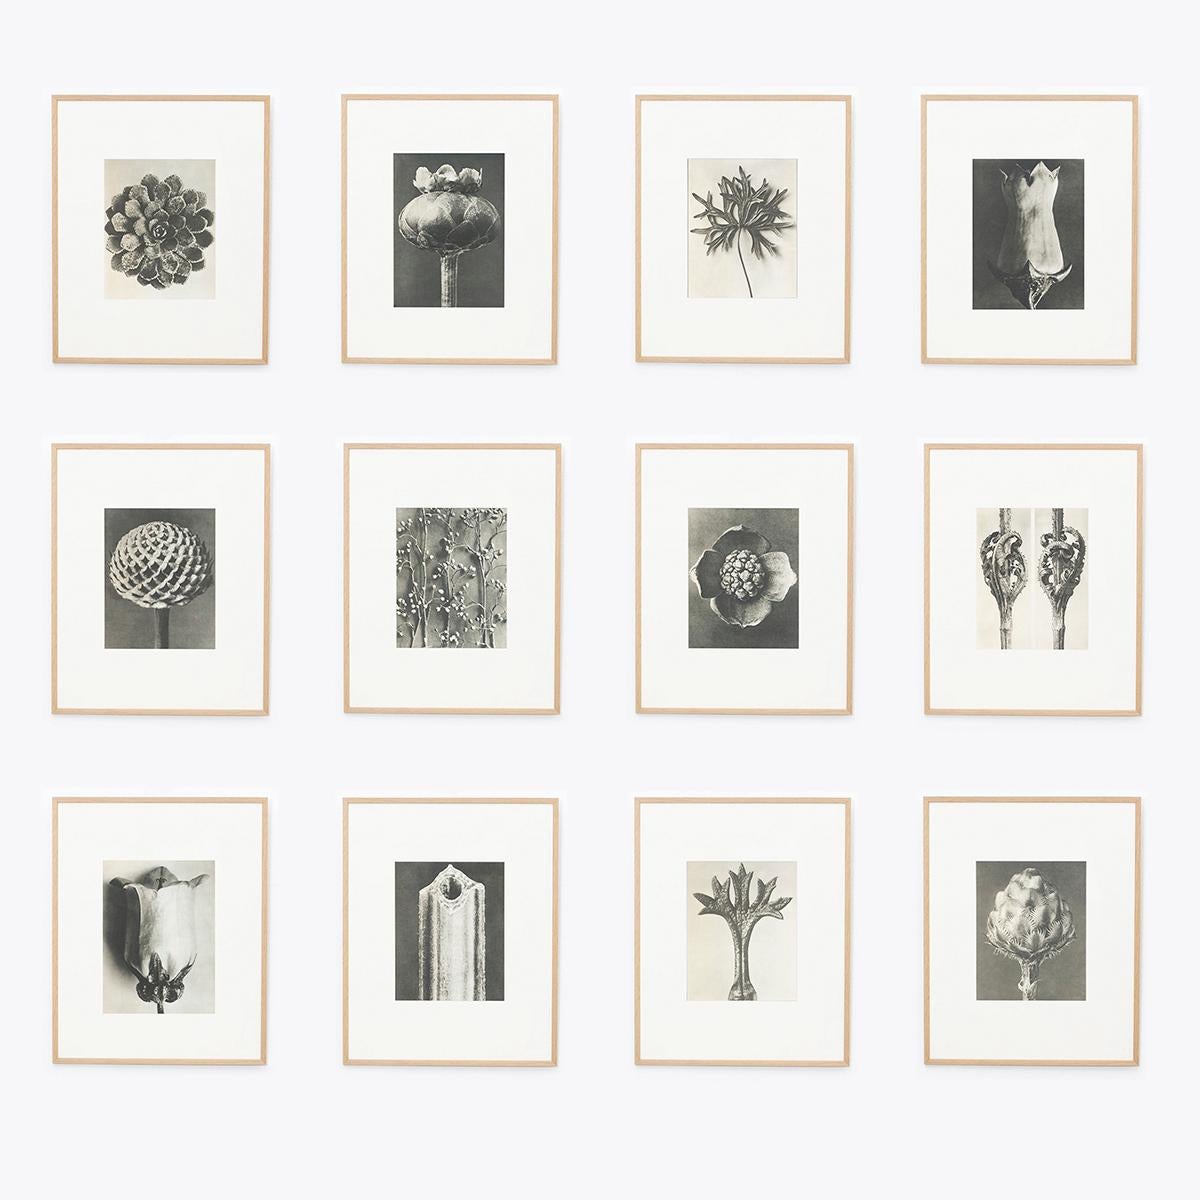 Set of twelve black and white photogravure.
Karl Blossfeldt photogravure from the edition of the book 'Wunder in der Natur' in 1942.

In original condition, with minor wear consistent with age and use, preserving a beautiful patina.

Karl